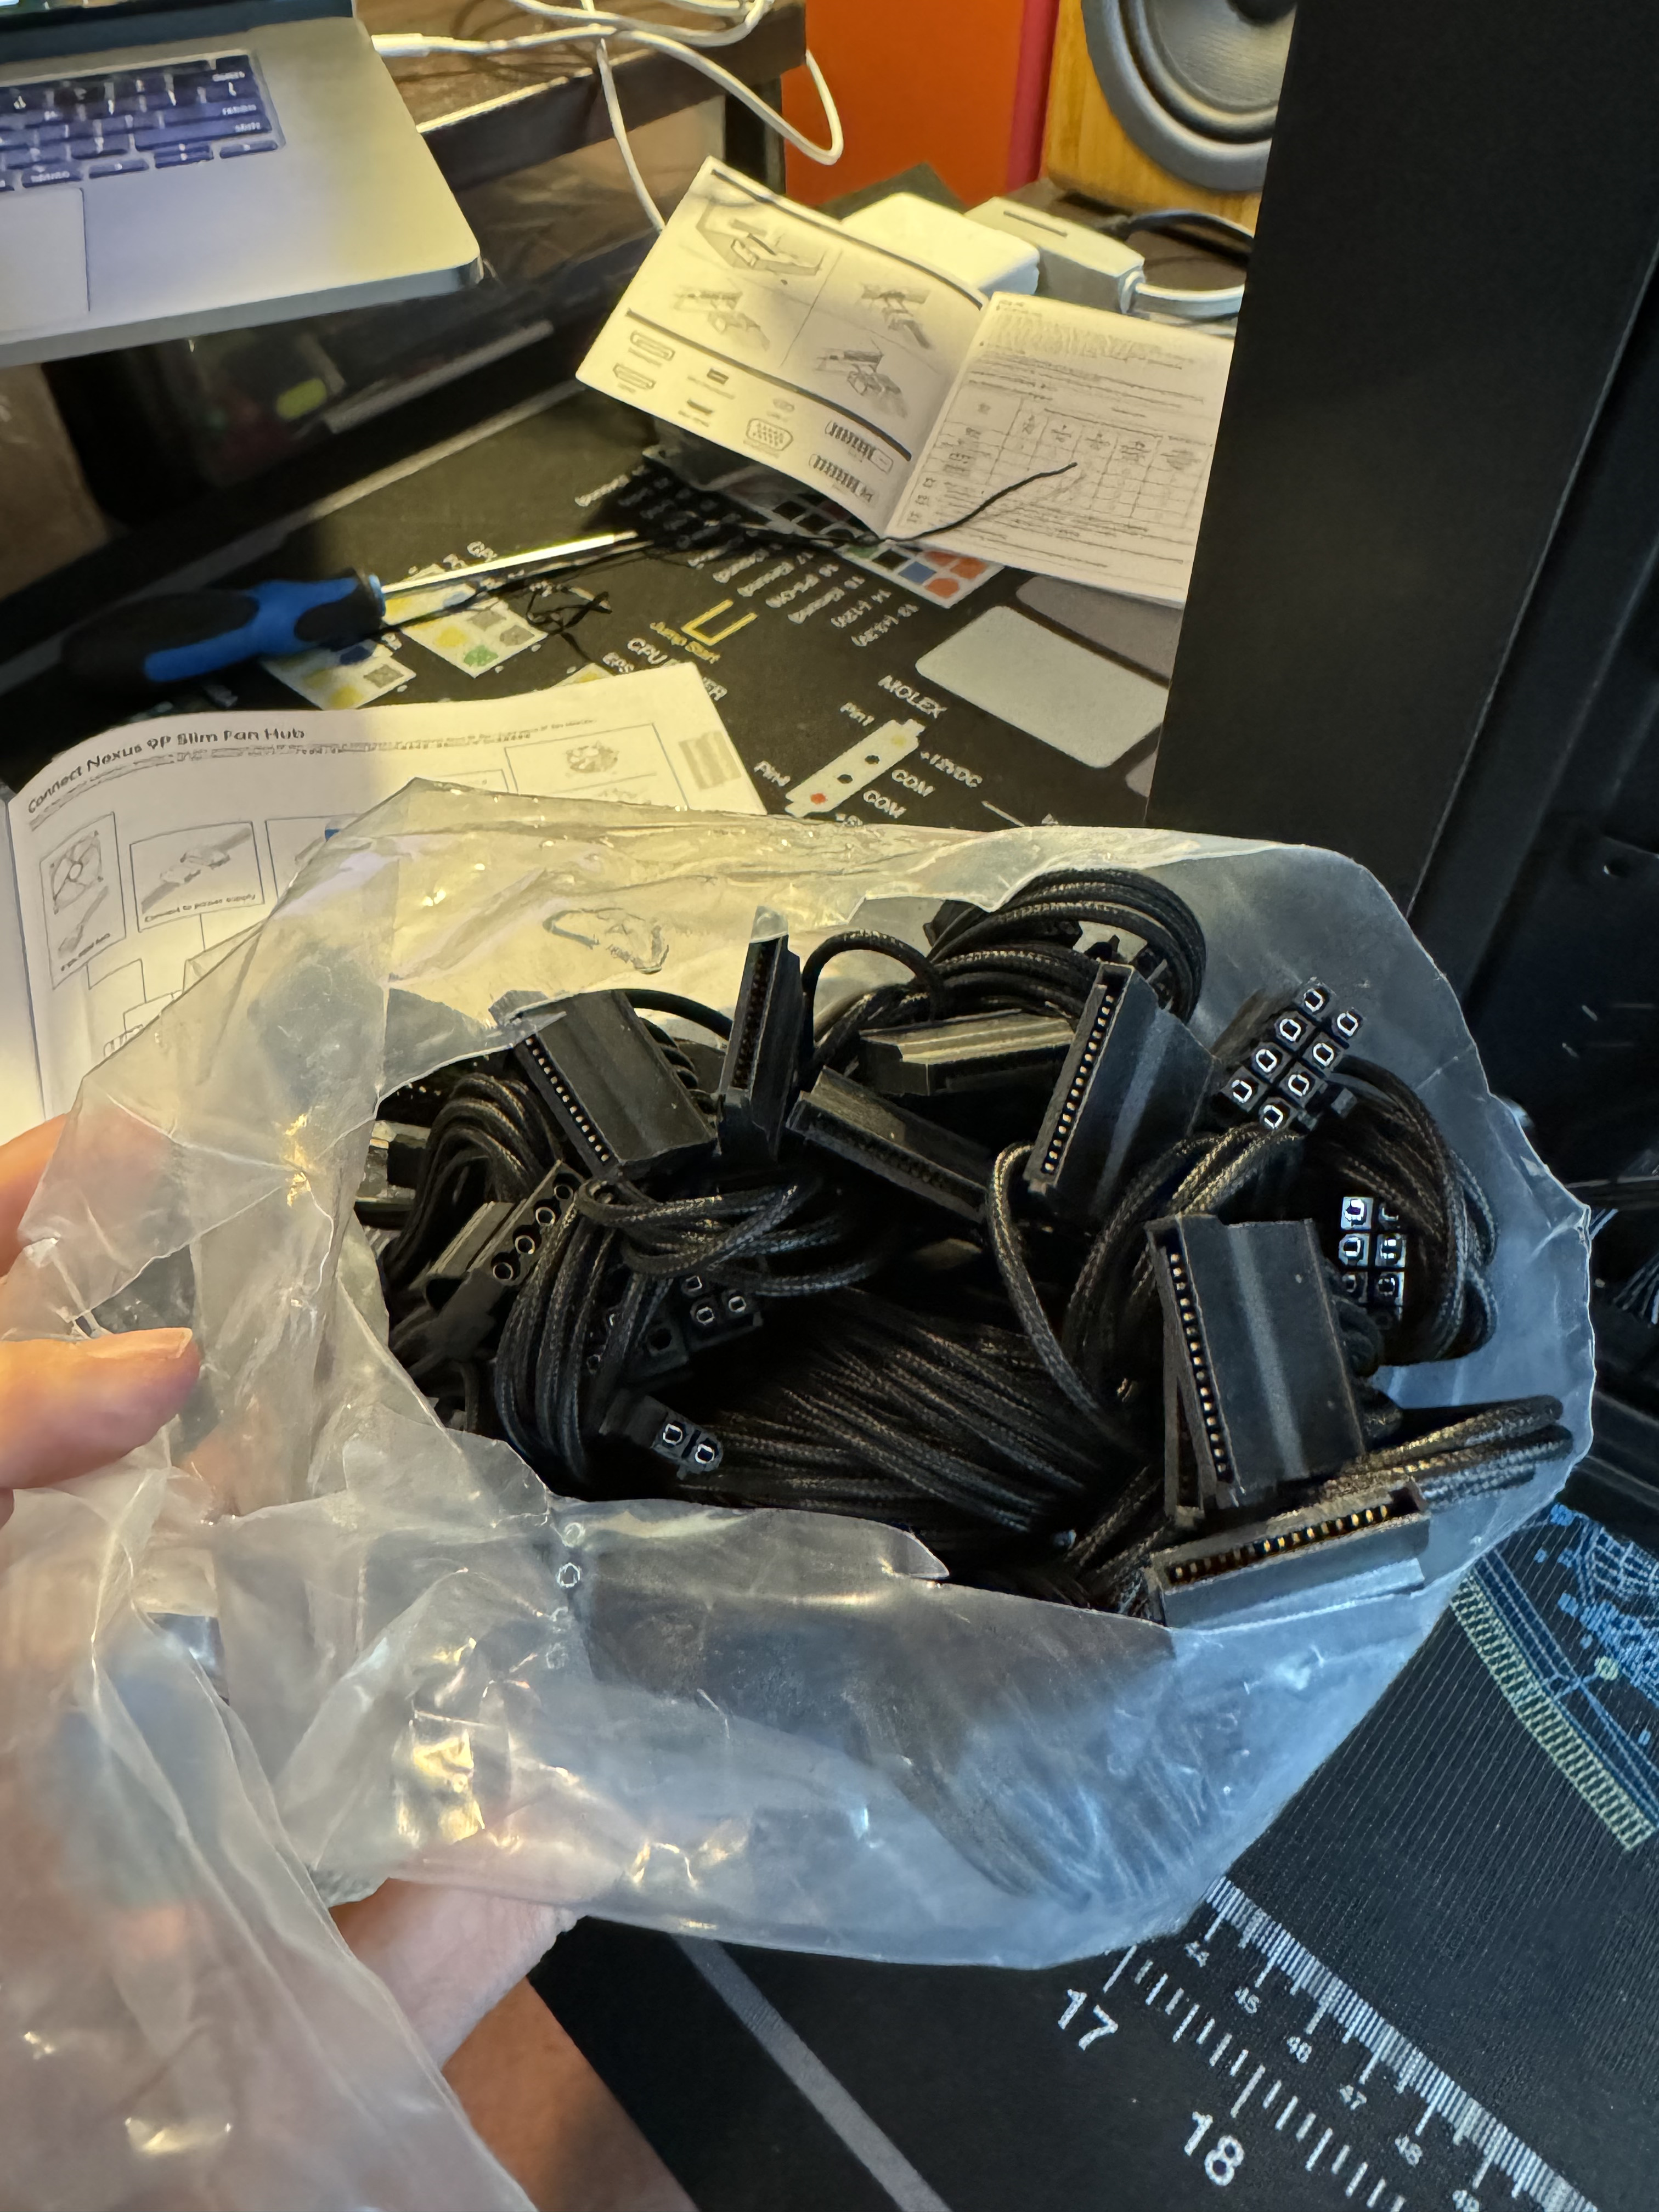 Literal bags’ worth of cables, depending on my hardware.